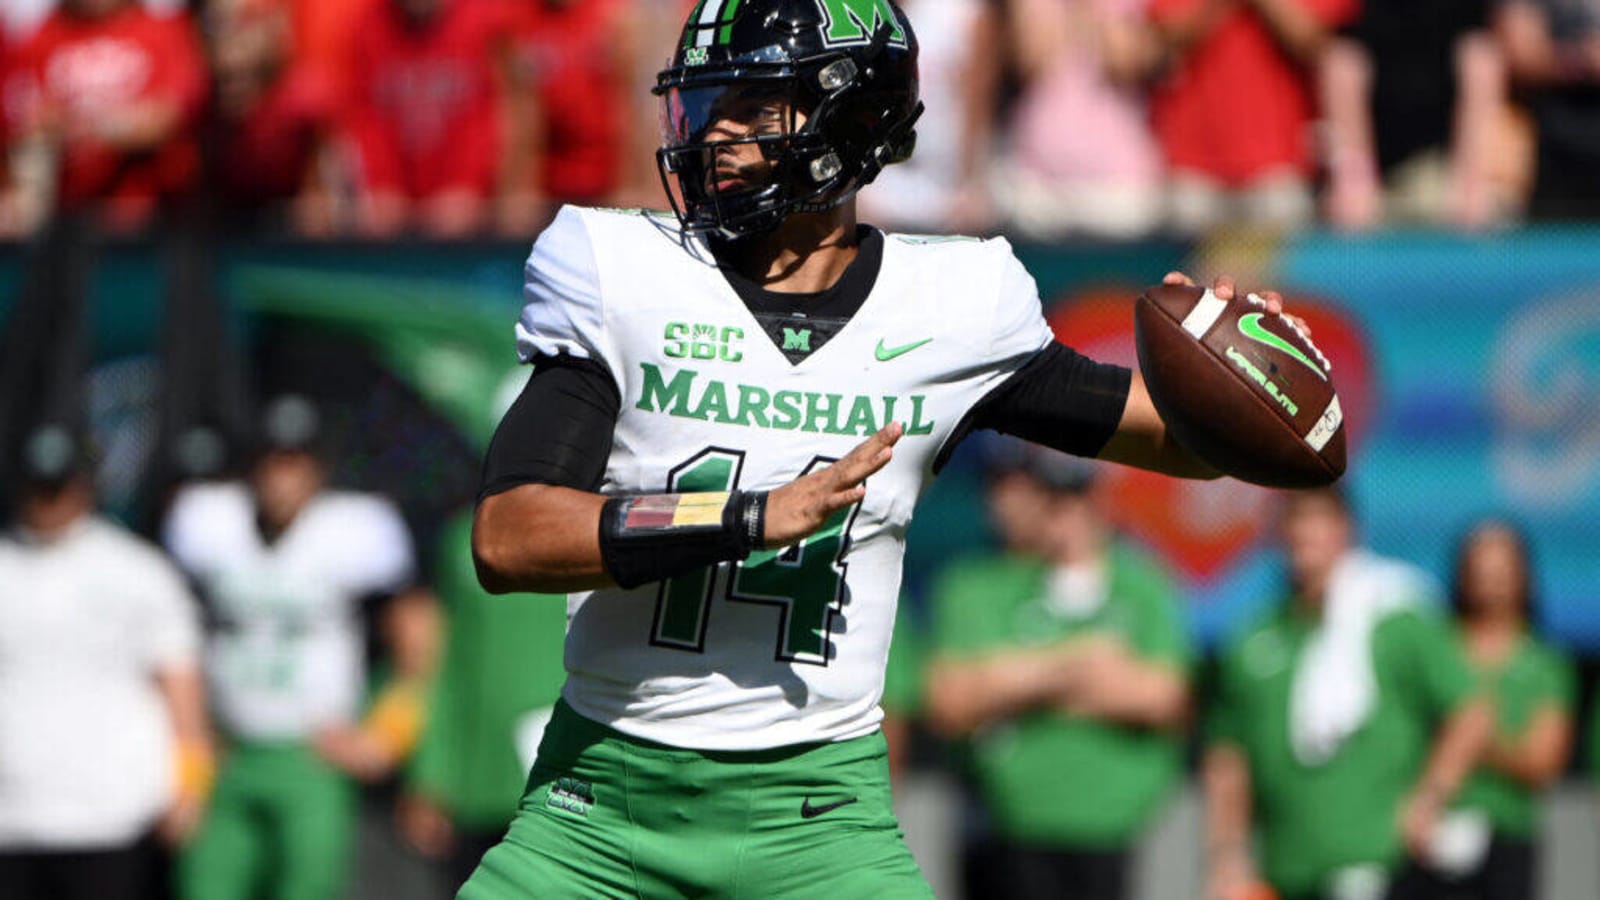 How to watch the 2023 Frisco Bowl NCAA Game via free live streaming today: Marshall Thundering Herd vs UTSA Roadrunners preview, start time, and TV channel